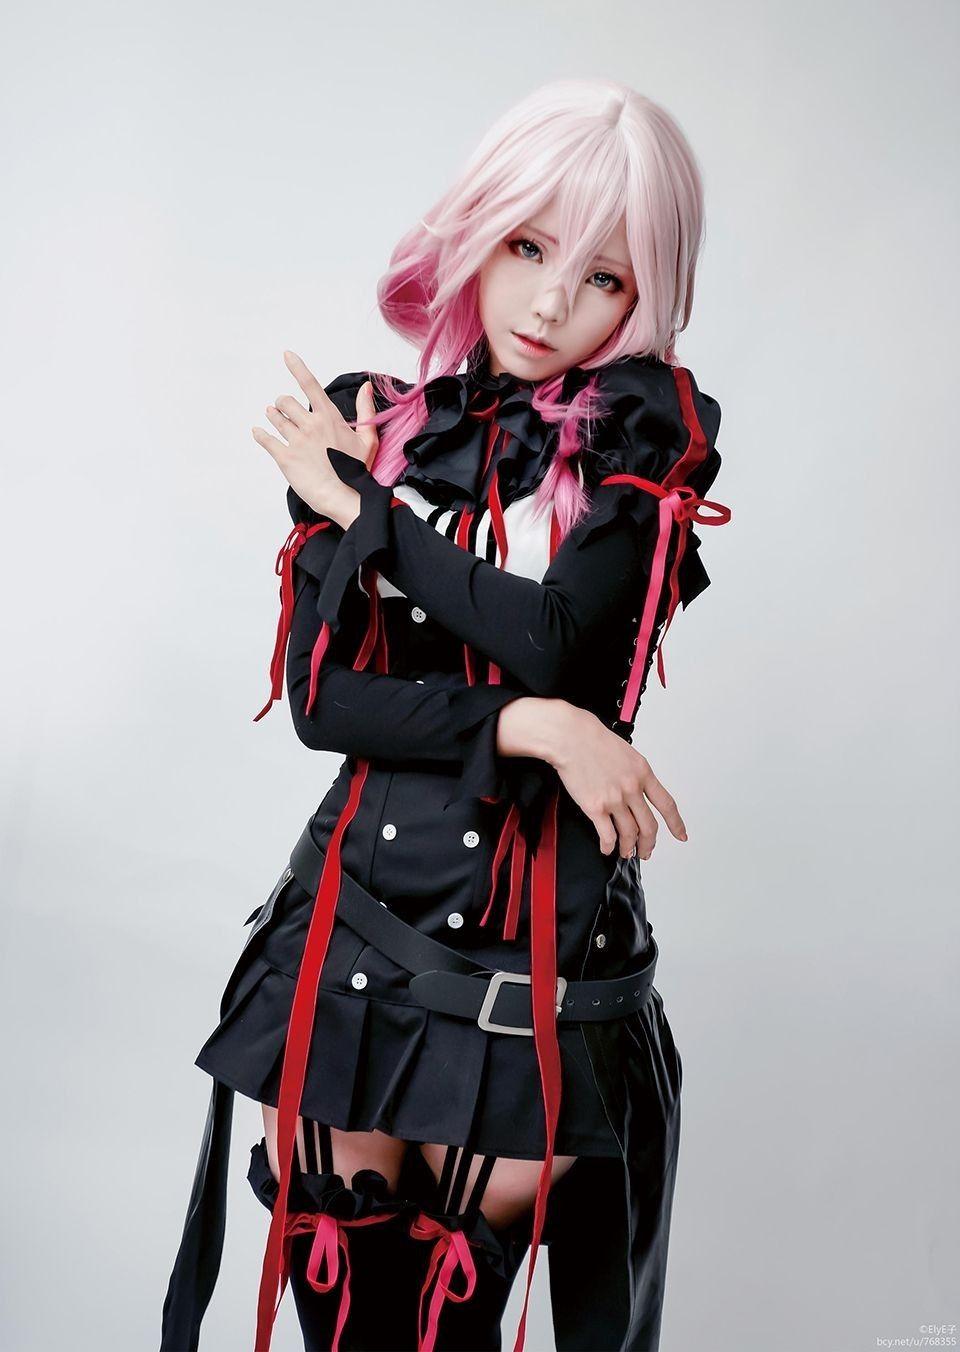 Cool anime cosplay wallpapers